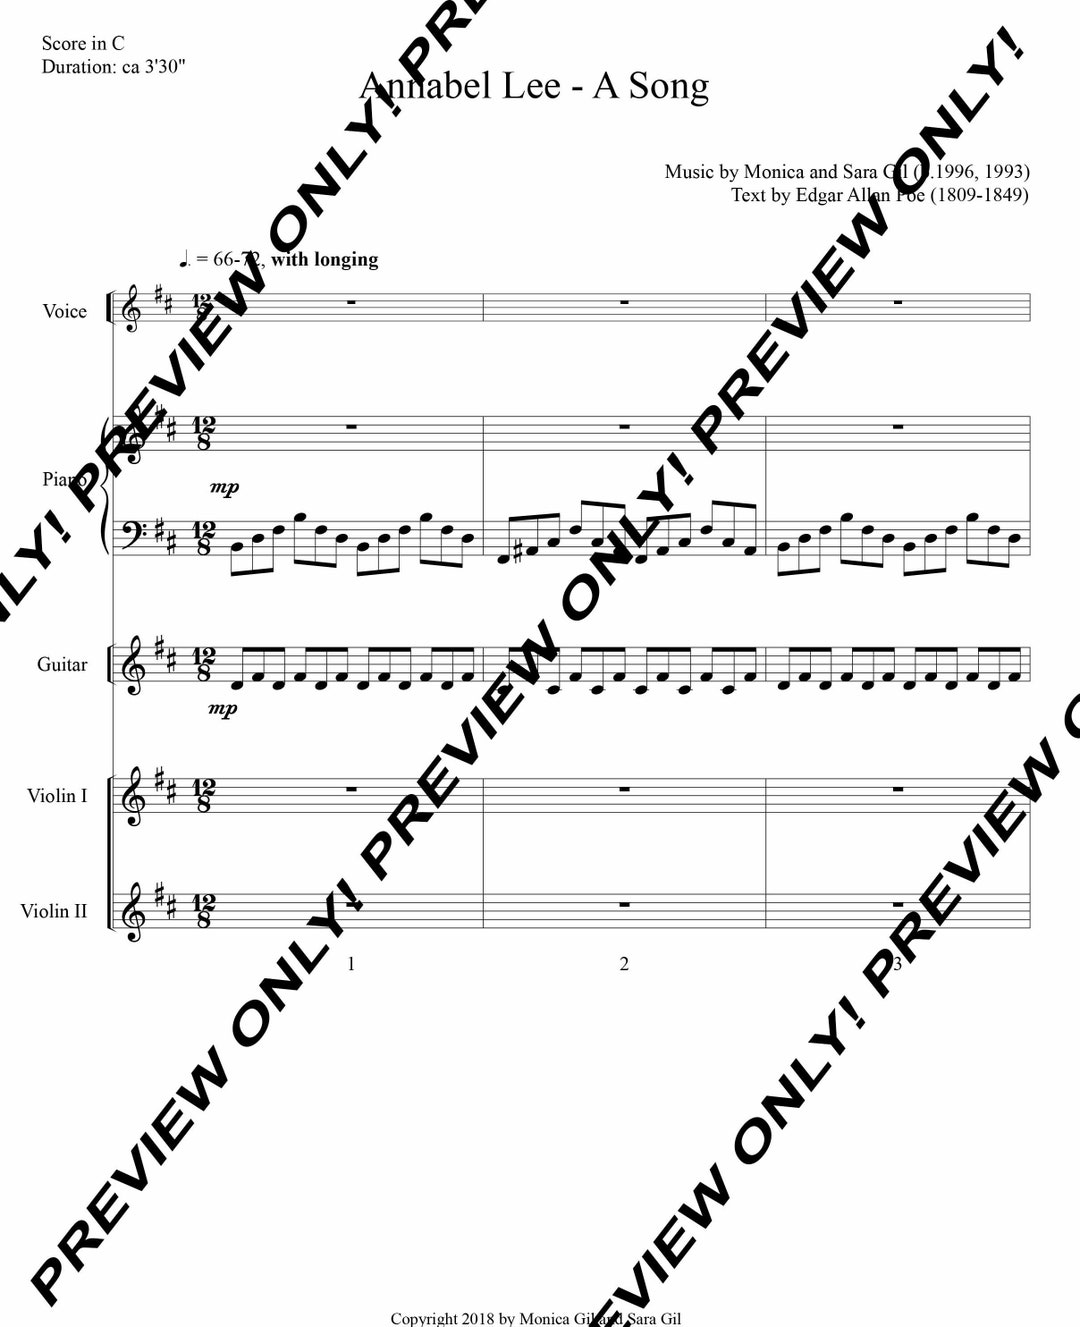 Sheet Music For Annabel Lee A Song Etsy 